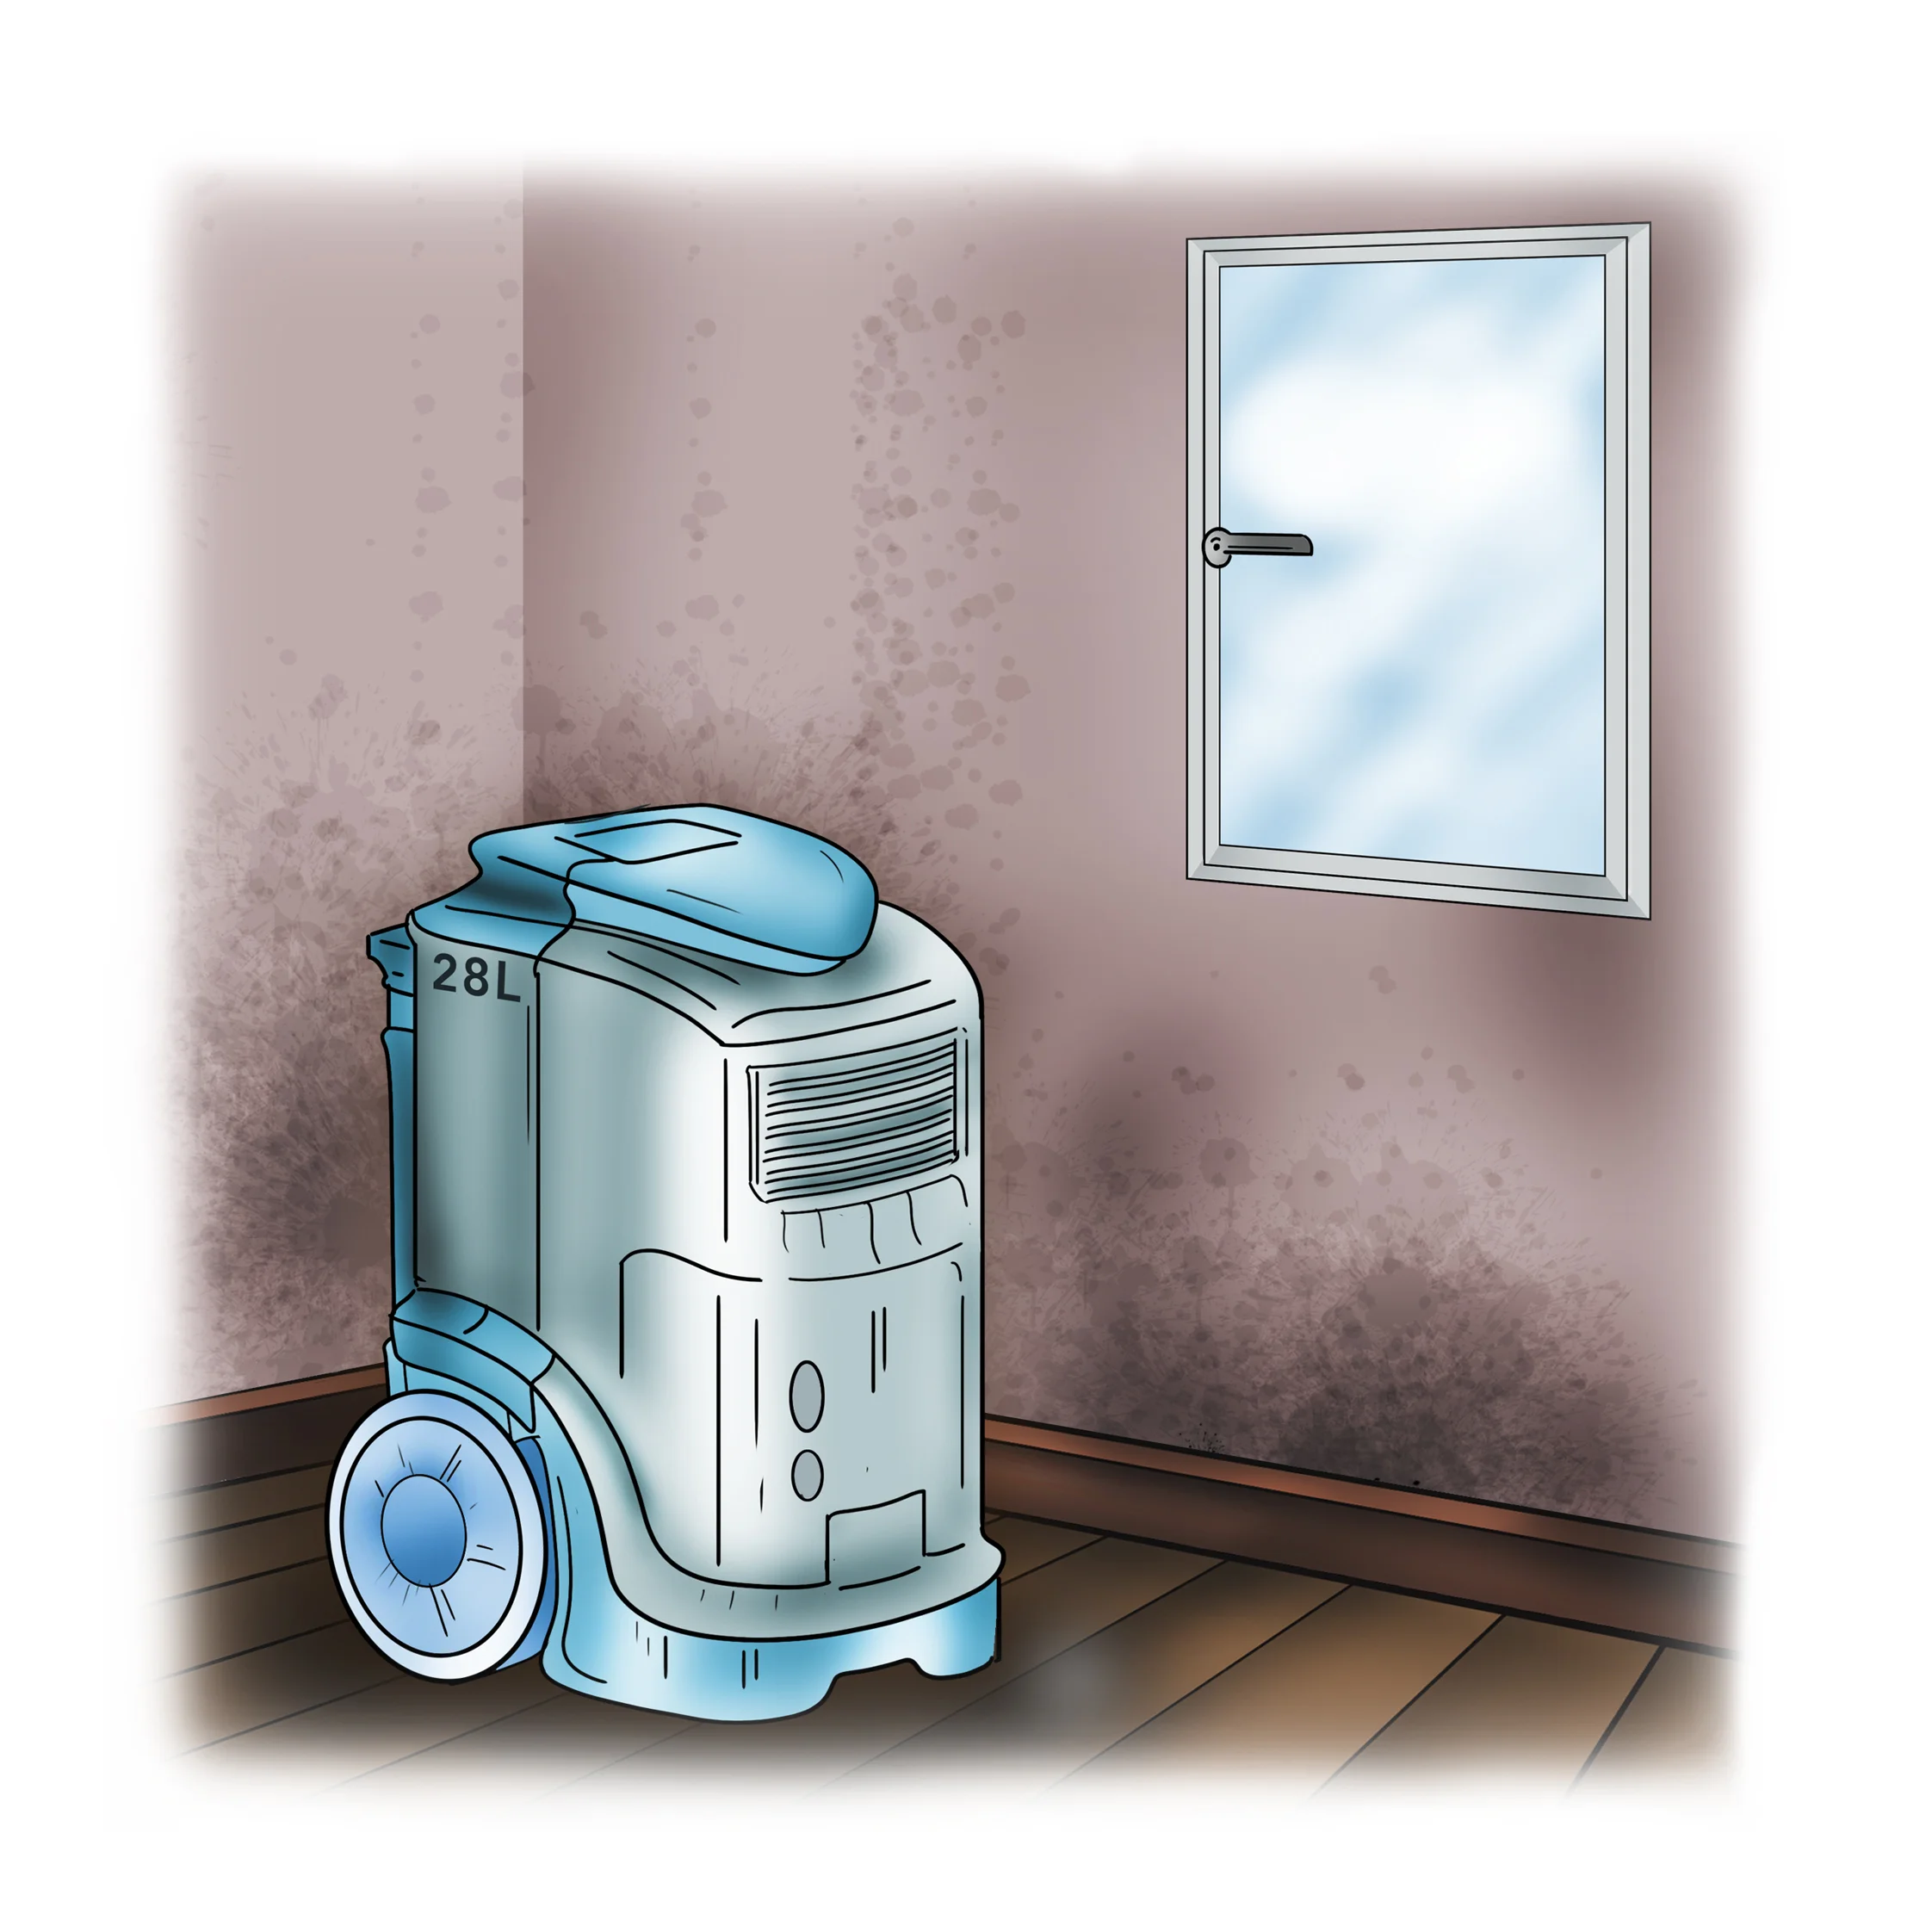 Buy a dehumidifier for large damp patches